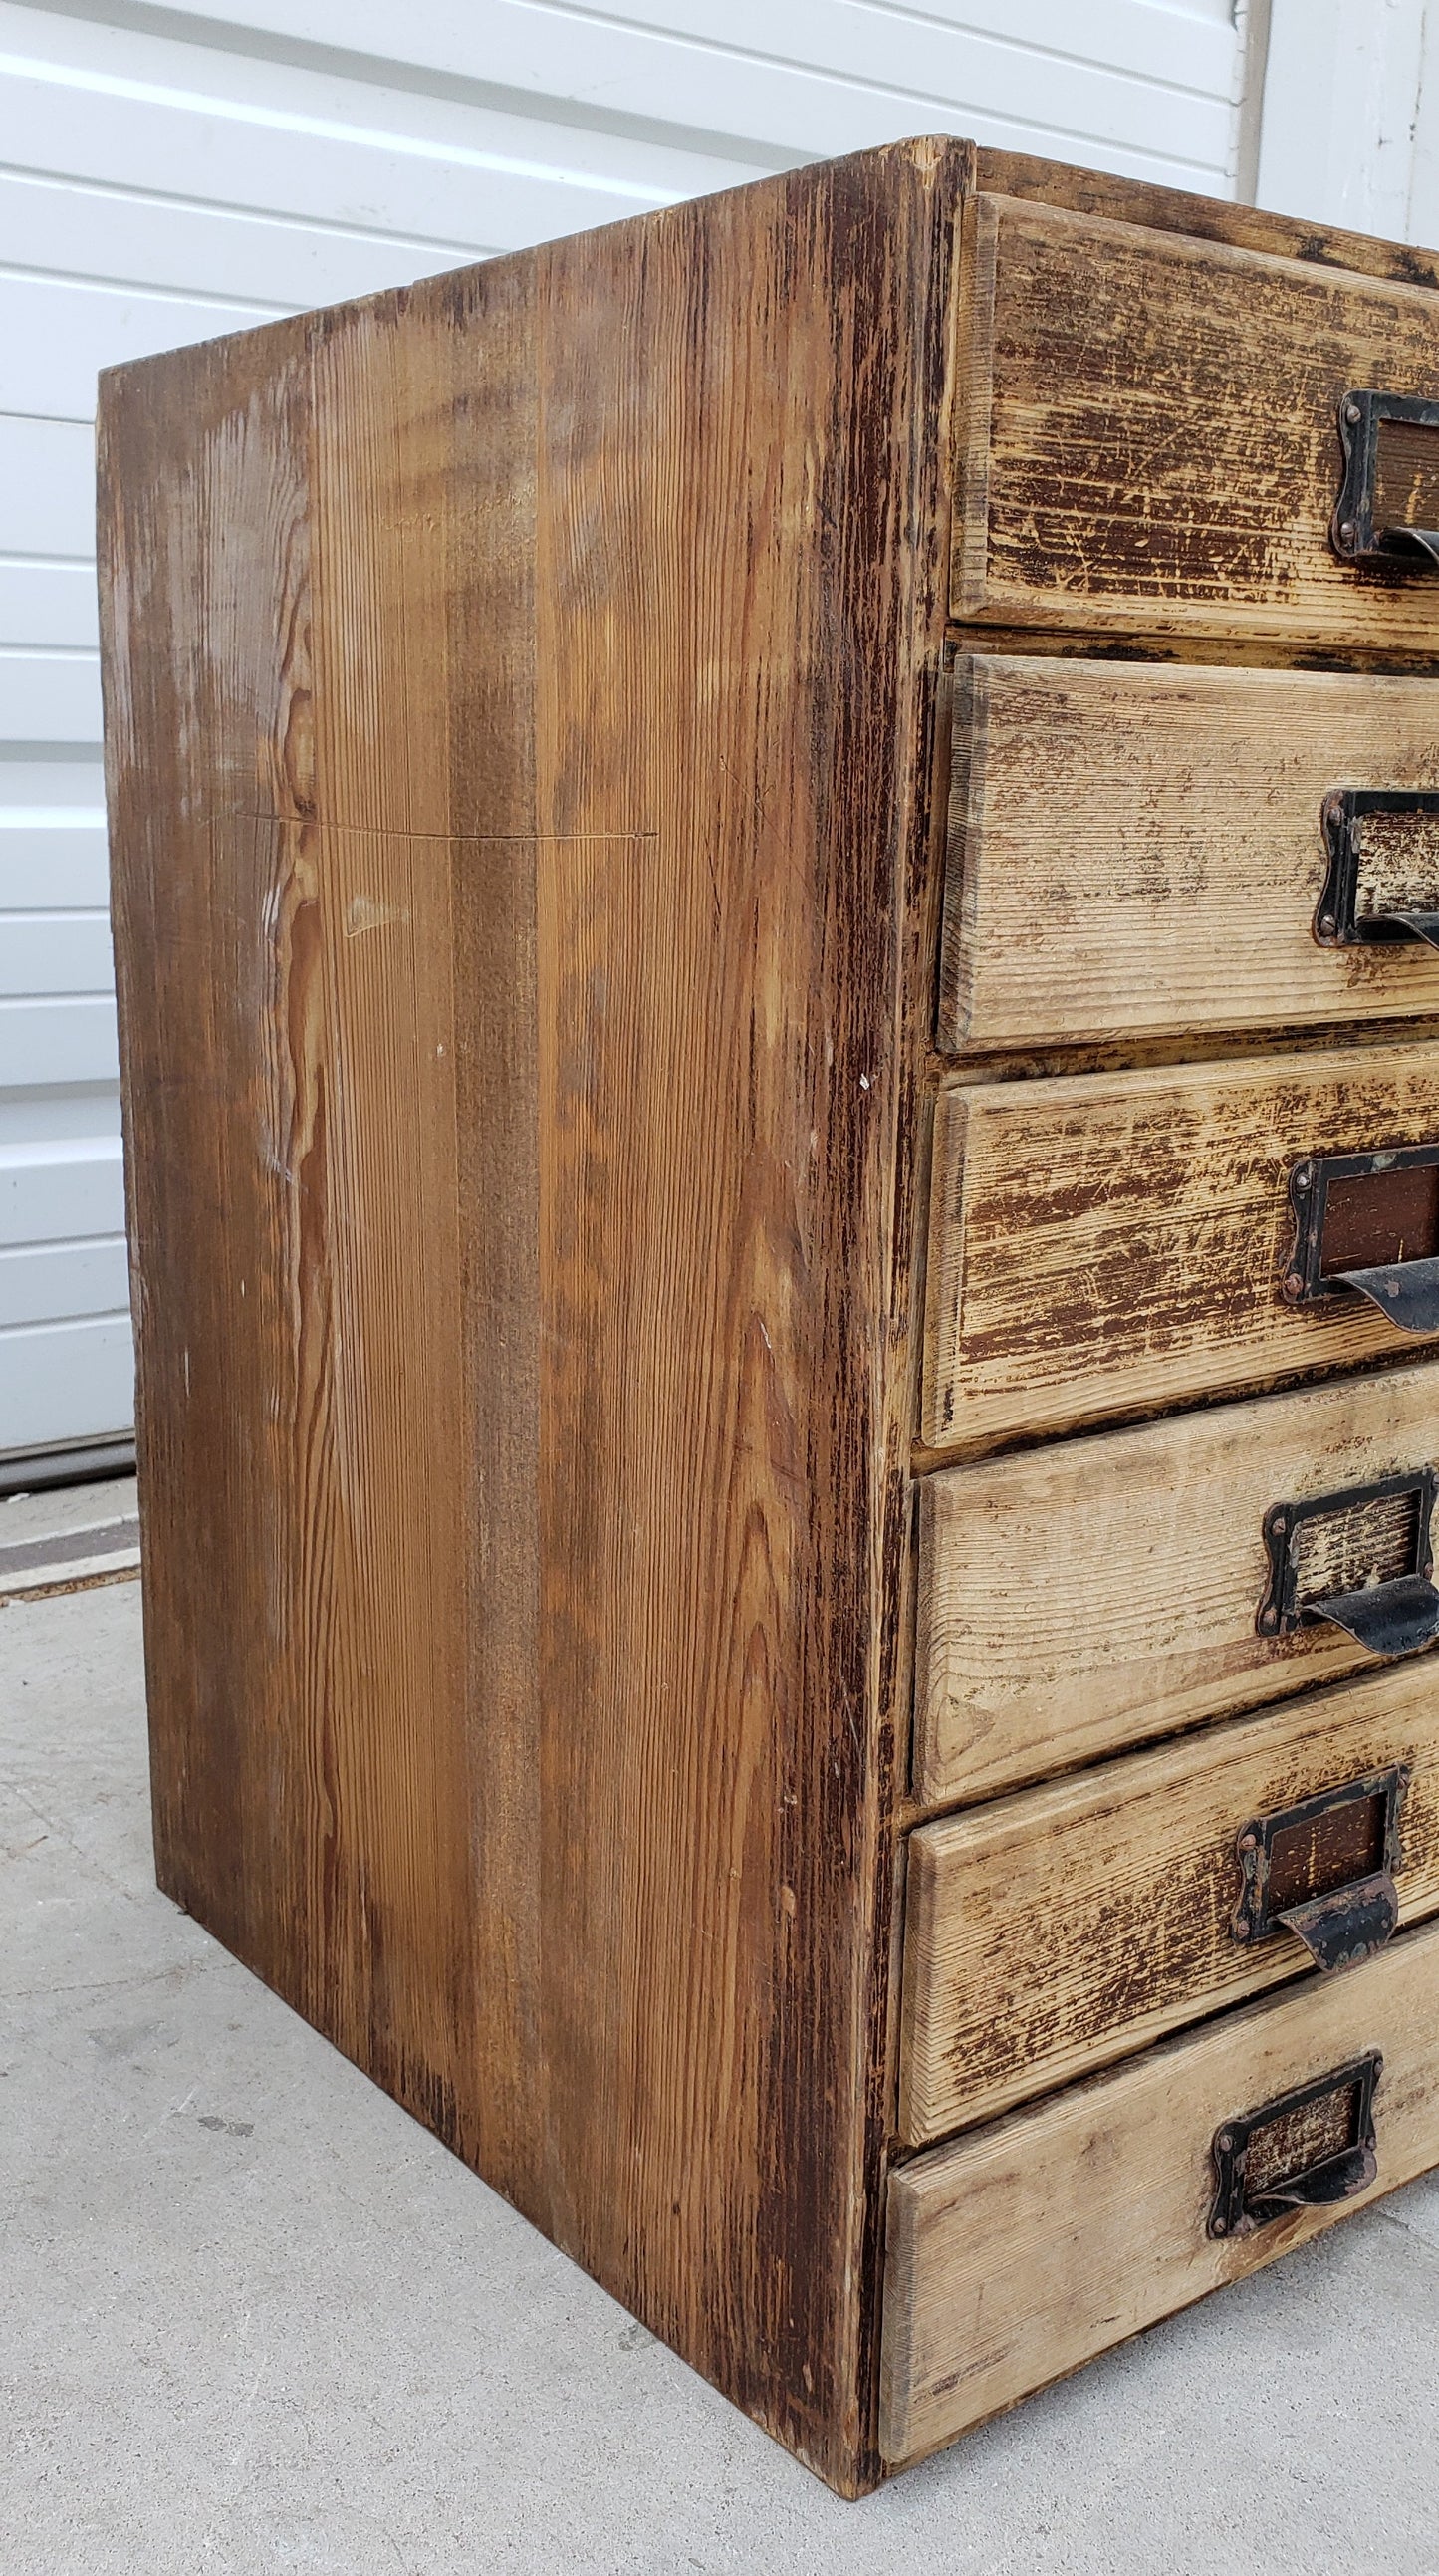 Antique Wooden Card Catalog (sold in individual sections)